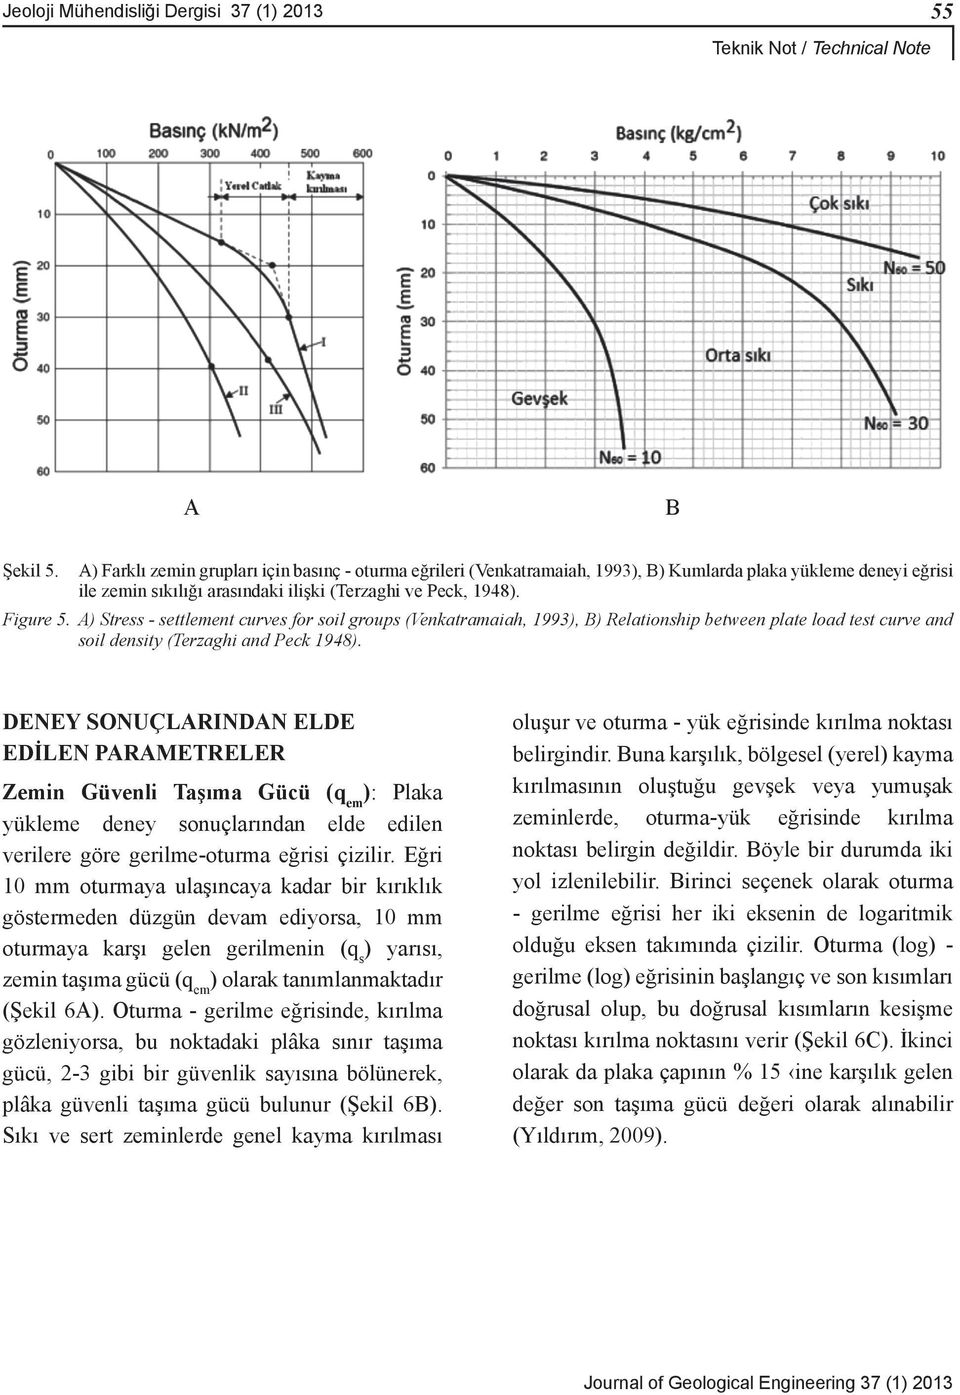 A) Stress - settlement curves for soil groups (Venkatramaiah, 1993), B) Relationship between plate load test curve and soil density (Terzaghi and Peck 1948).